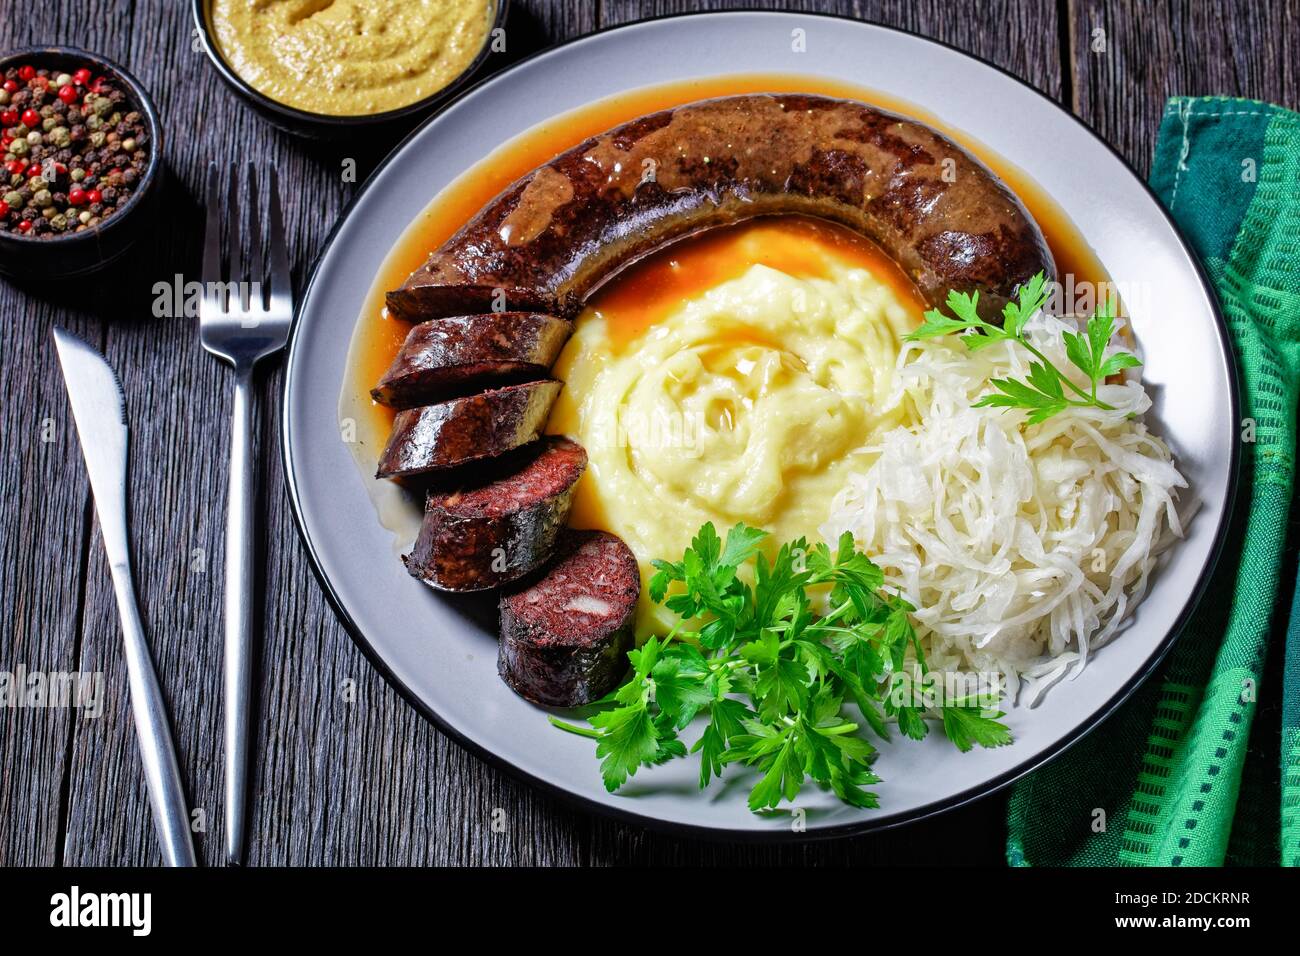 German food: blutwurst or blood sausage served on a plate with sauerkraut, mashed potato parsley, mustard, and peppercorns on a dark wooden table, top Stock Photo